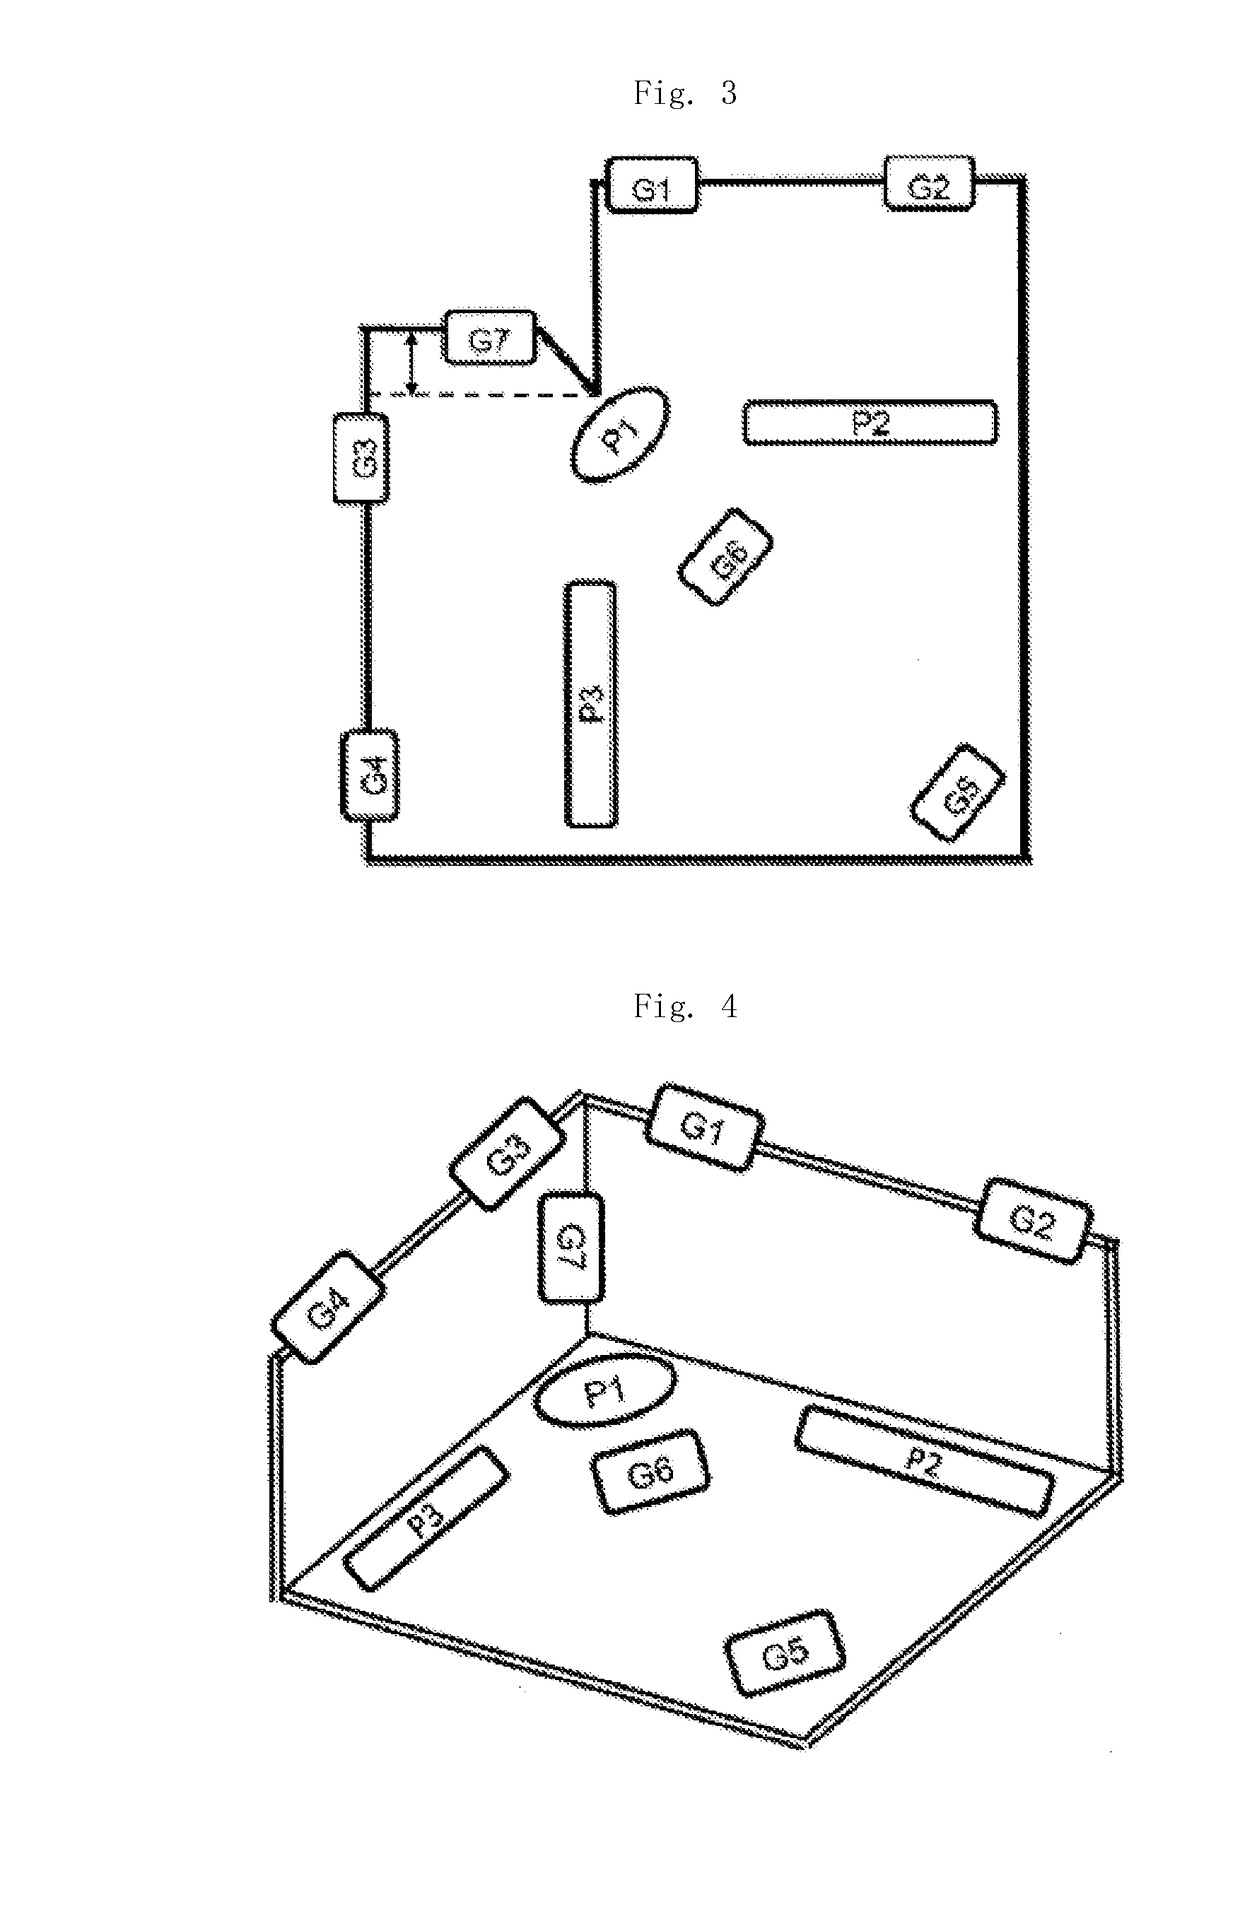 Method of manufacturing a press molding